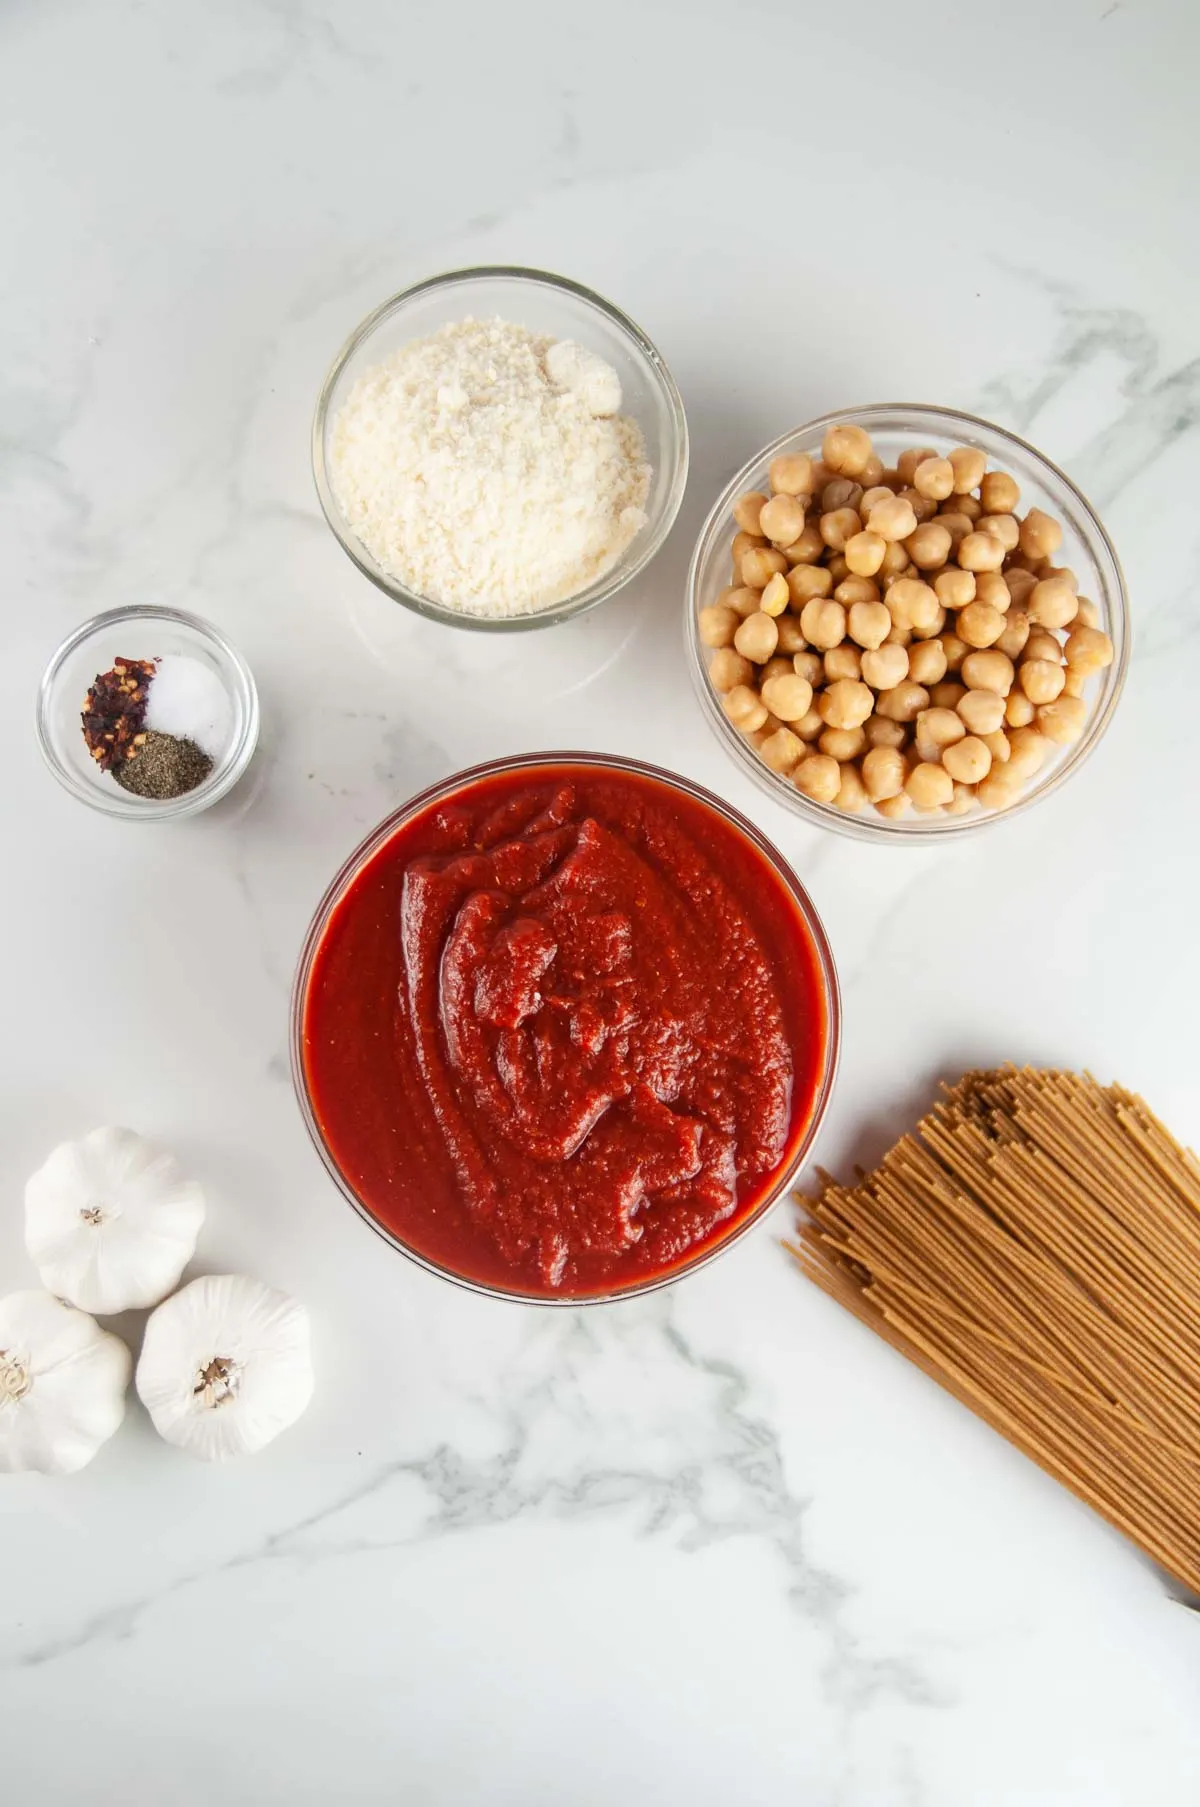 Ingredients for Easy Pasta with Chickpeas or Pasta e Ceci: Pasta, Crushed Tomatoes, Garlic, Spices, Parmesan Cheese, and Chickpeas